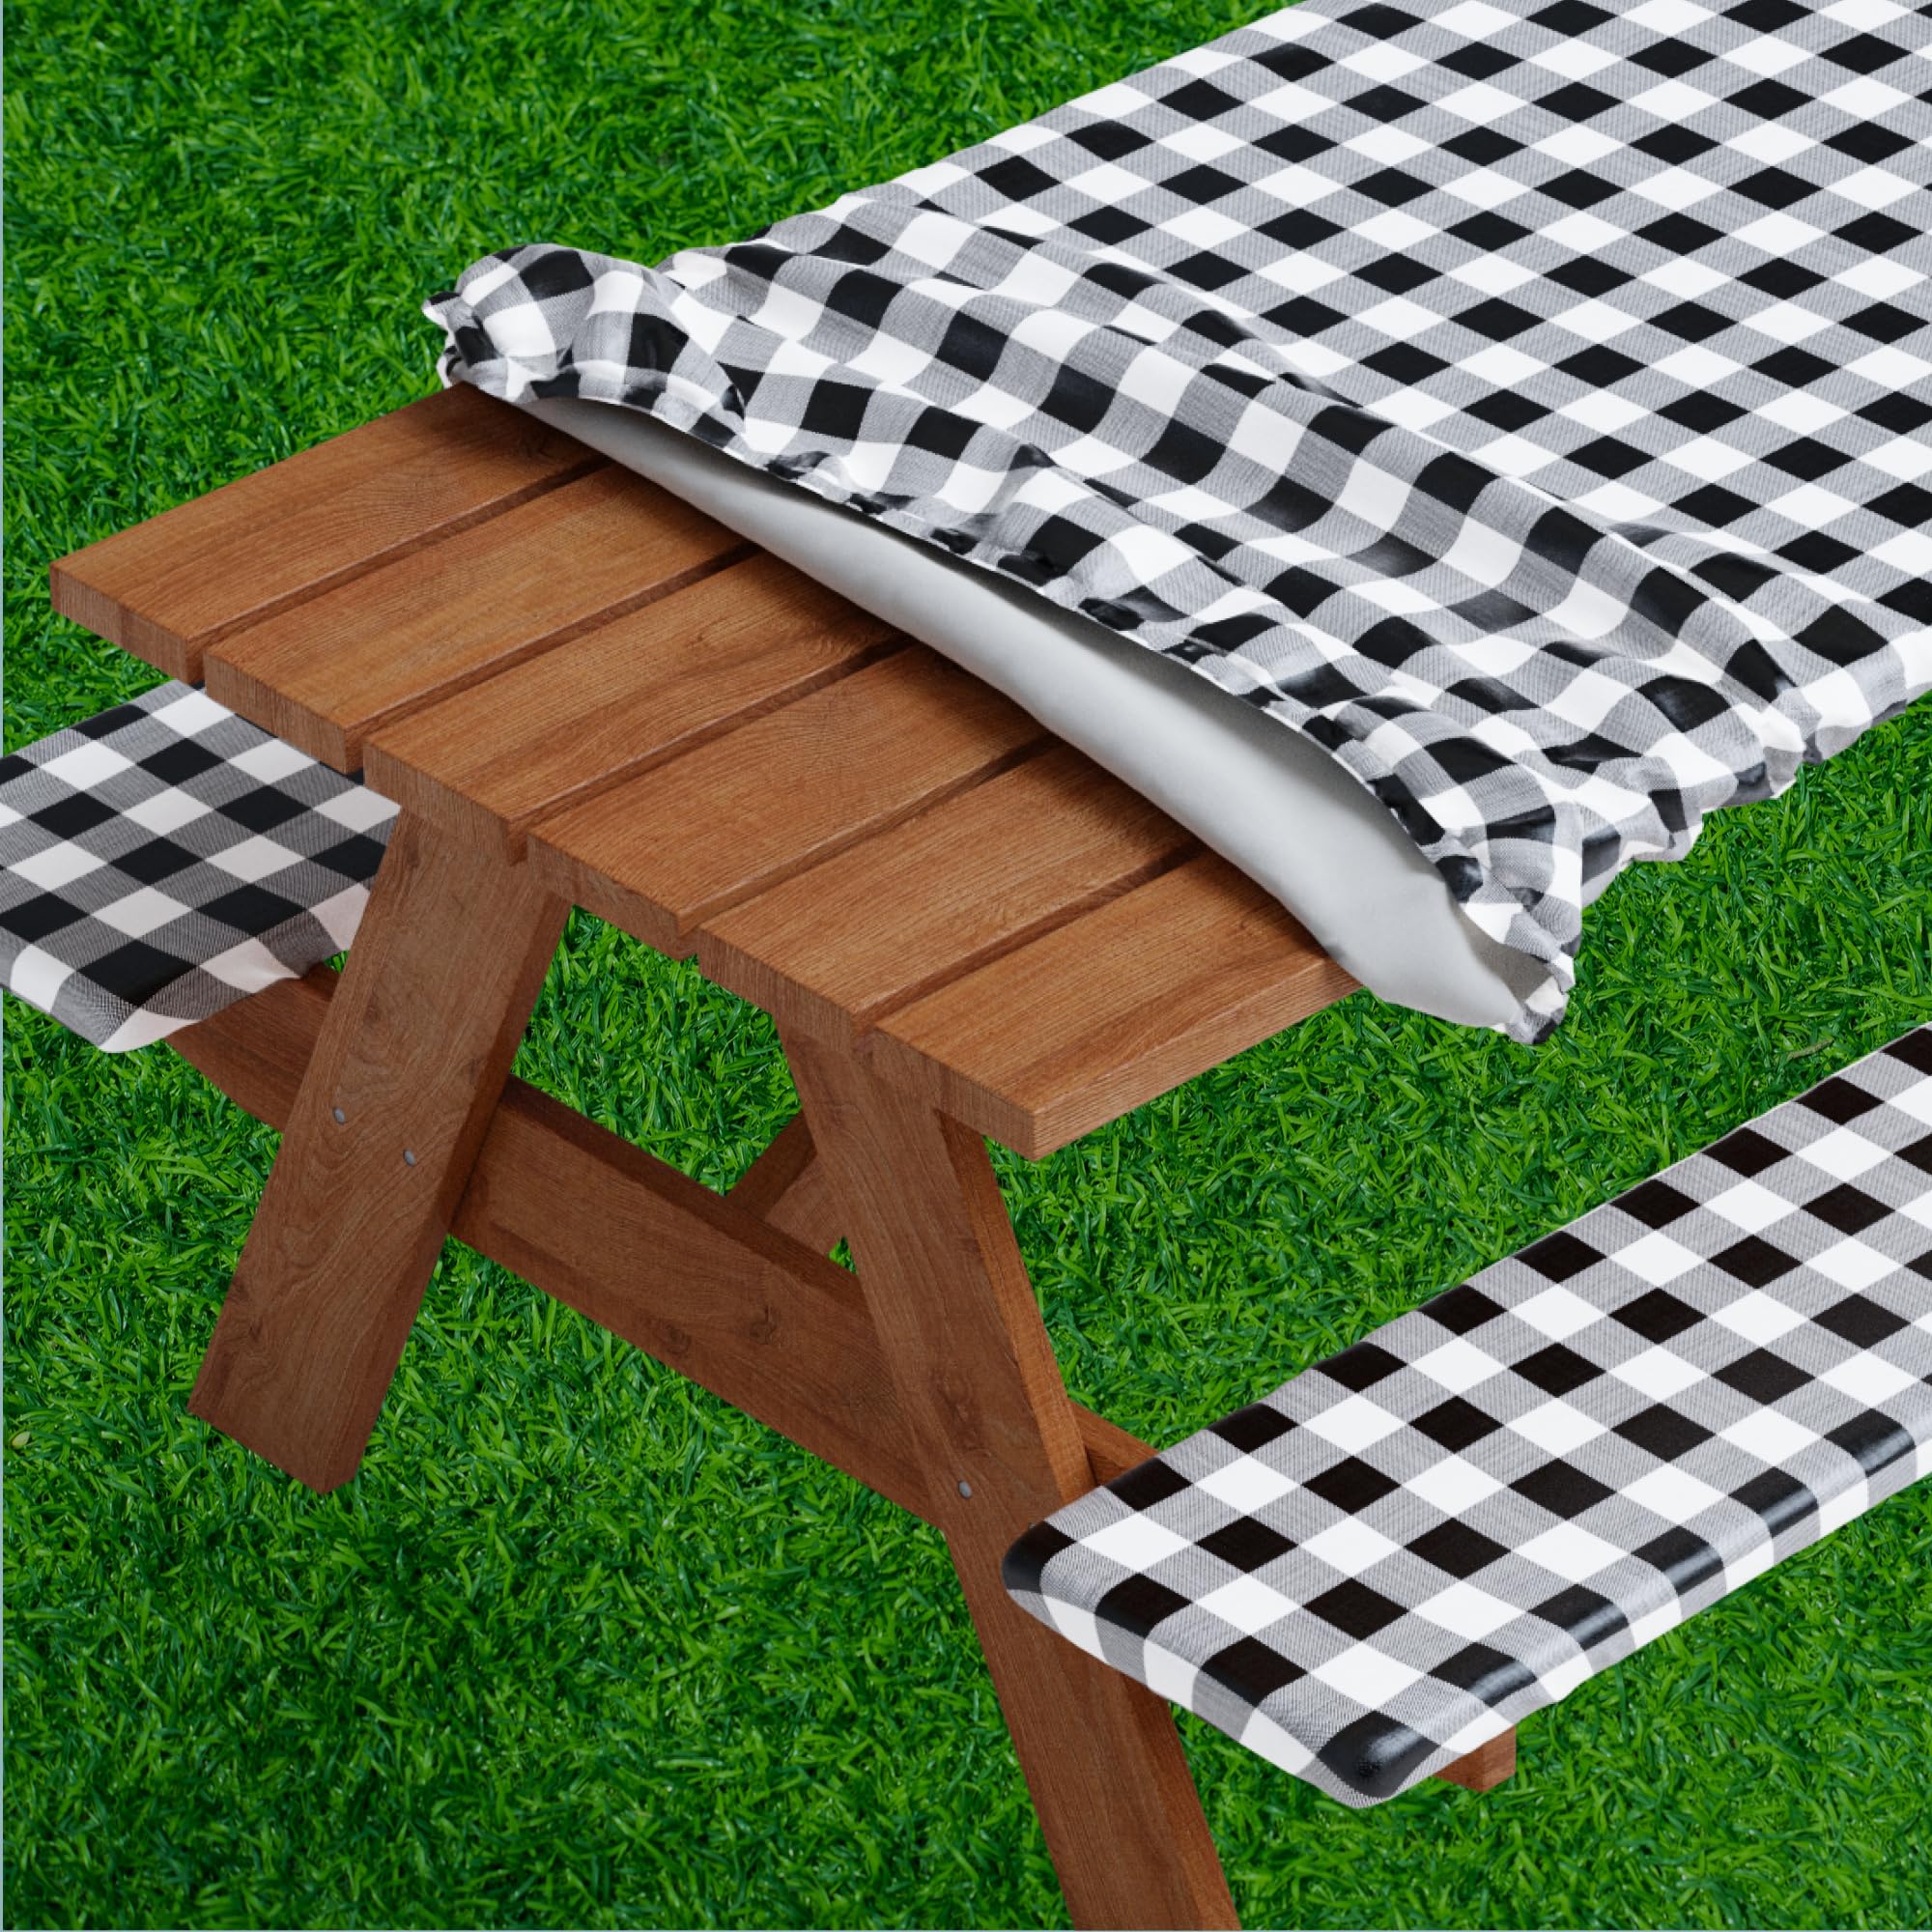 Sorfey Picnic Table Cover with Bench Covers -Fitted with Elastic, Vinyl with Flannel Back, Fits for Table 30"x 96" Rectangle,Water Proof, Checked Yellow Design  - Like New